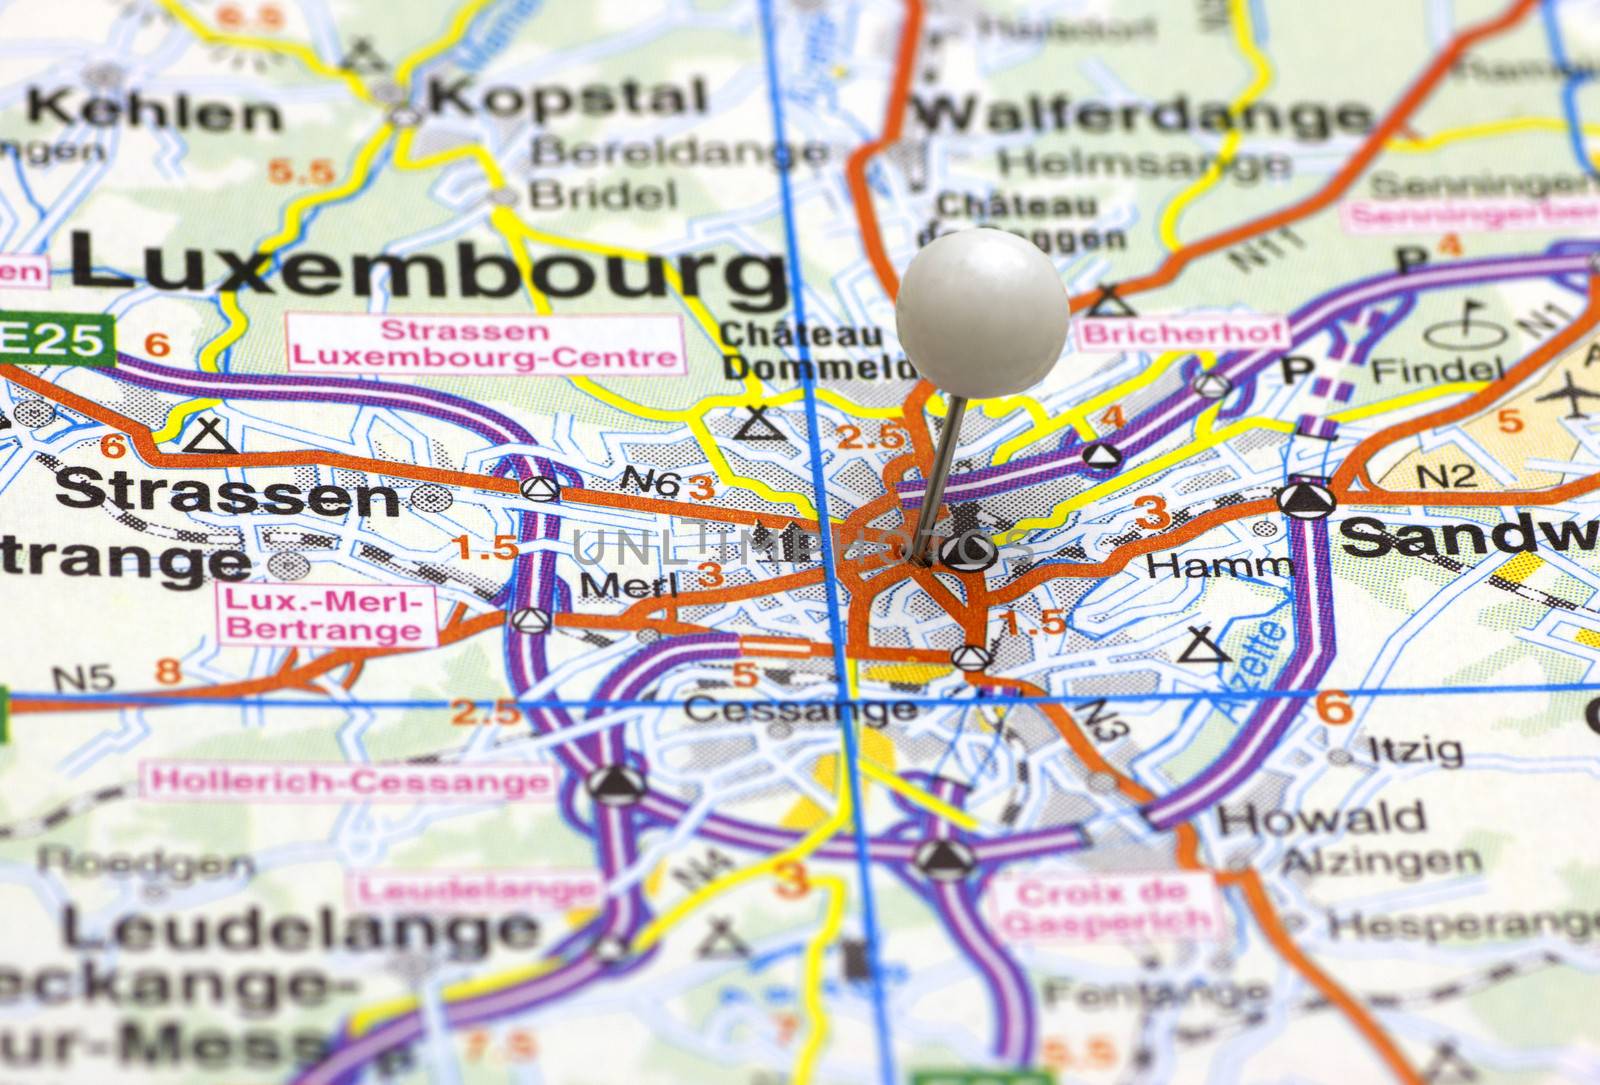 Luxembourg City on a map indicated by a thumb tack